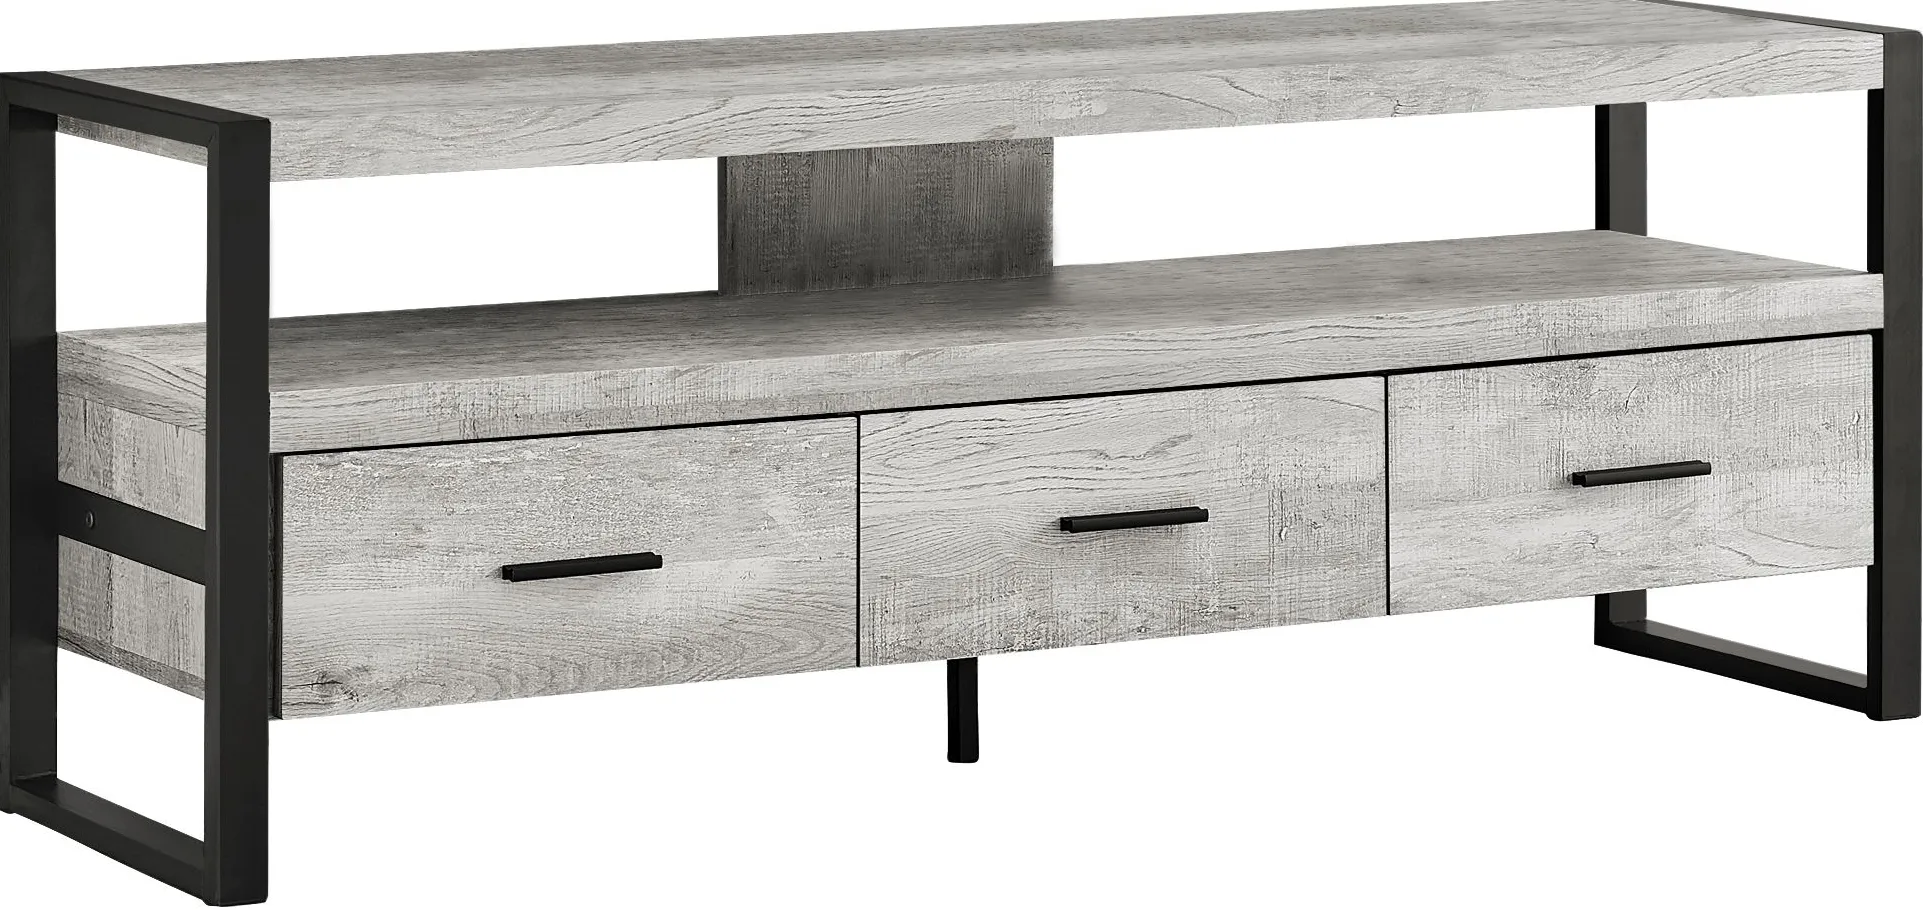 Tv Stand, 60 Inch, Console, Media Entertainment Center, Storage Drawers, Living Room, Bedroom, Metal, Laminate, Grey, Black, Contemporary, Modern